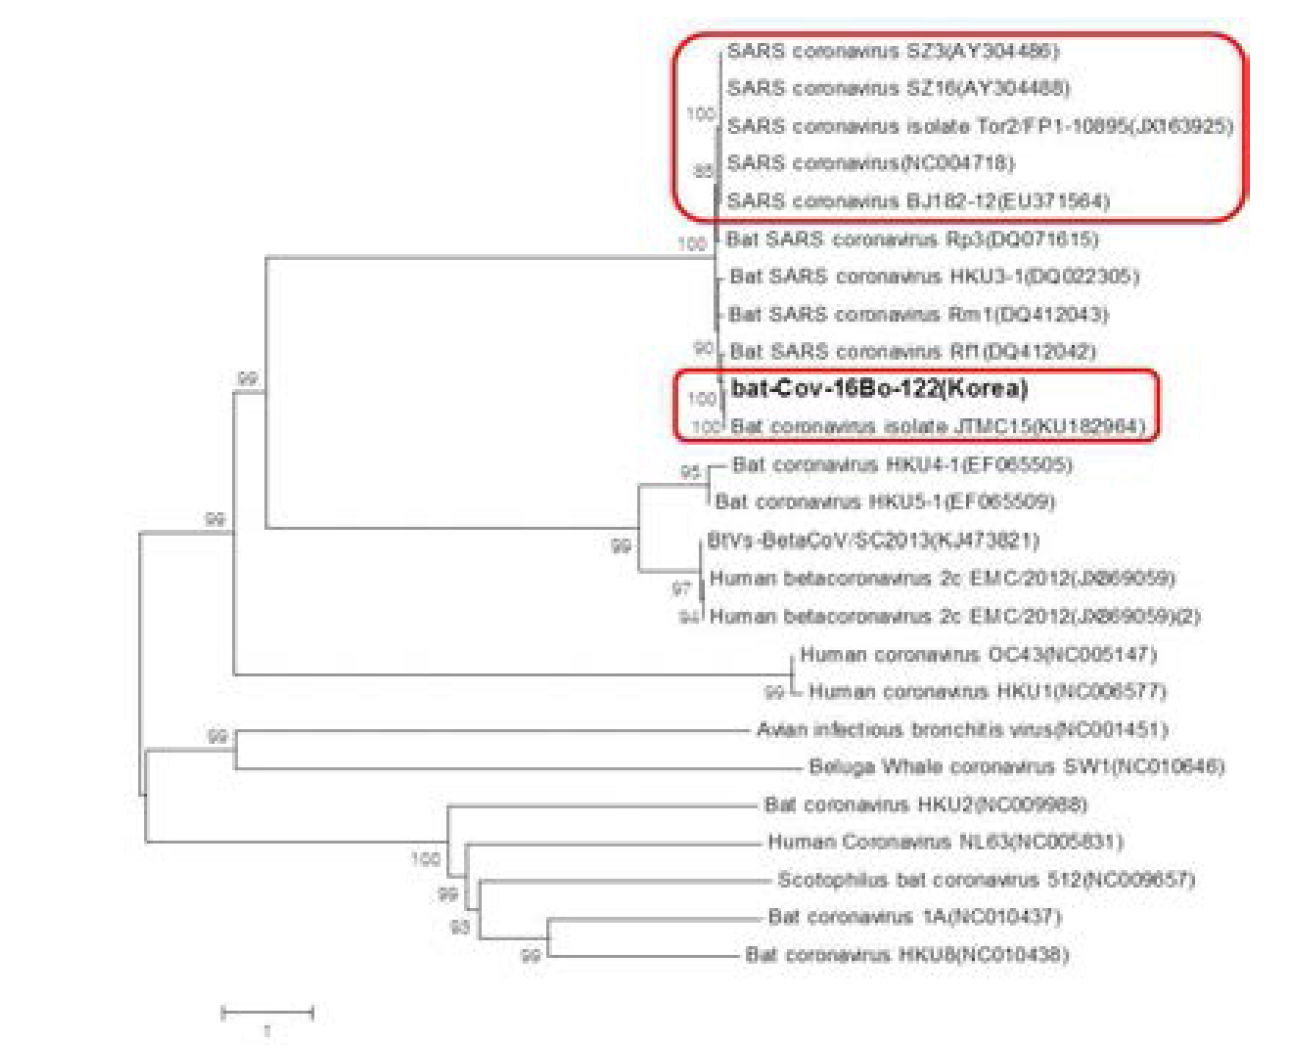 Phylogenetic trees based on complete sequences constructed from Korean bat coronavirus sequences detected in this study and from other coronaviruses